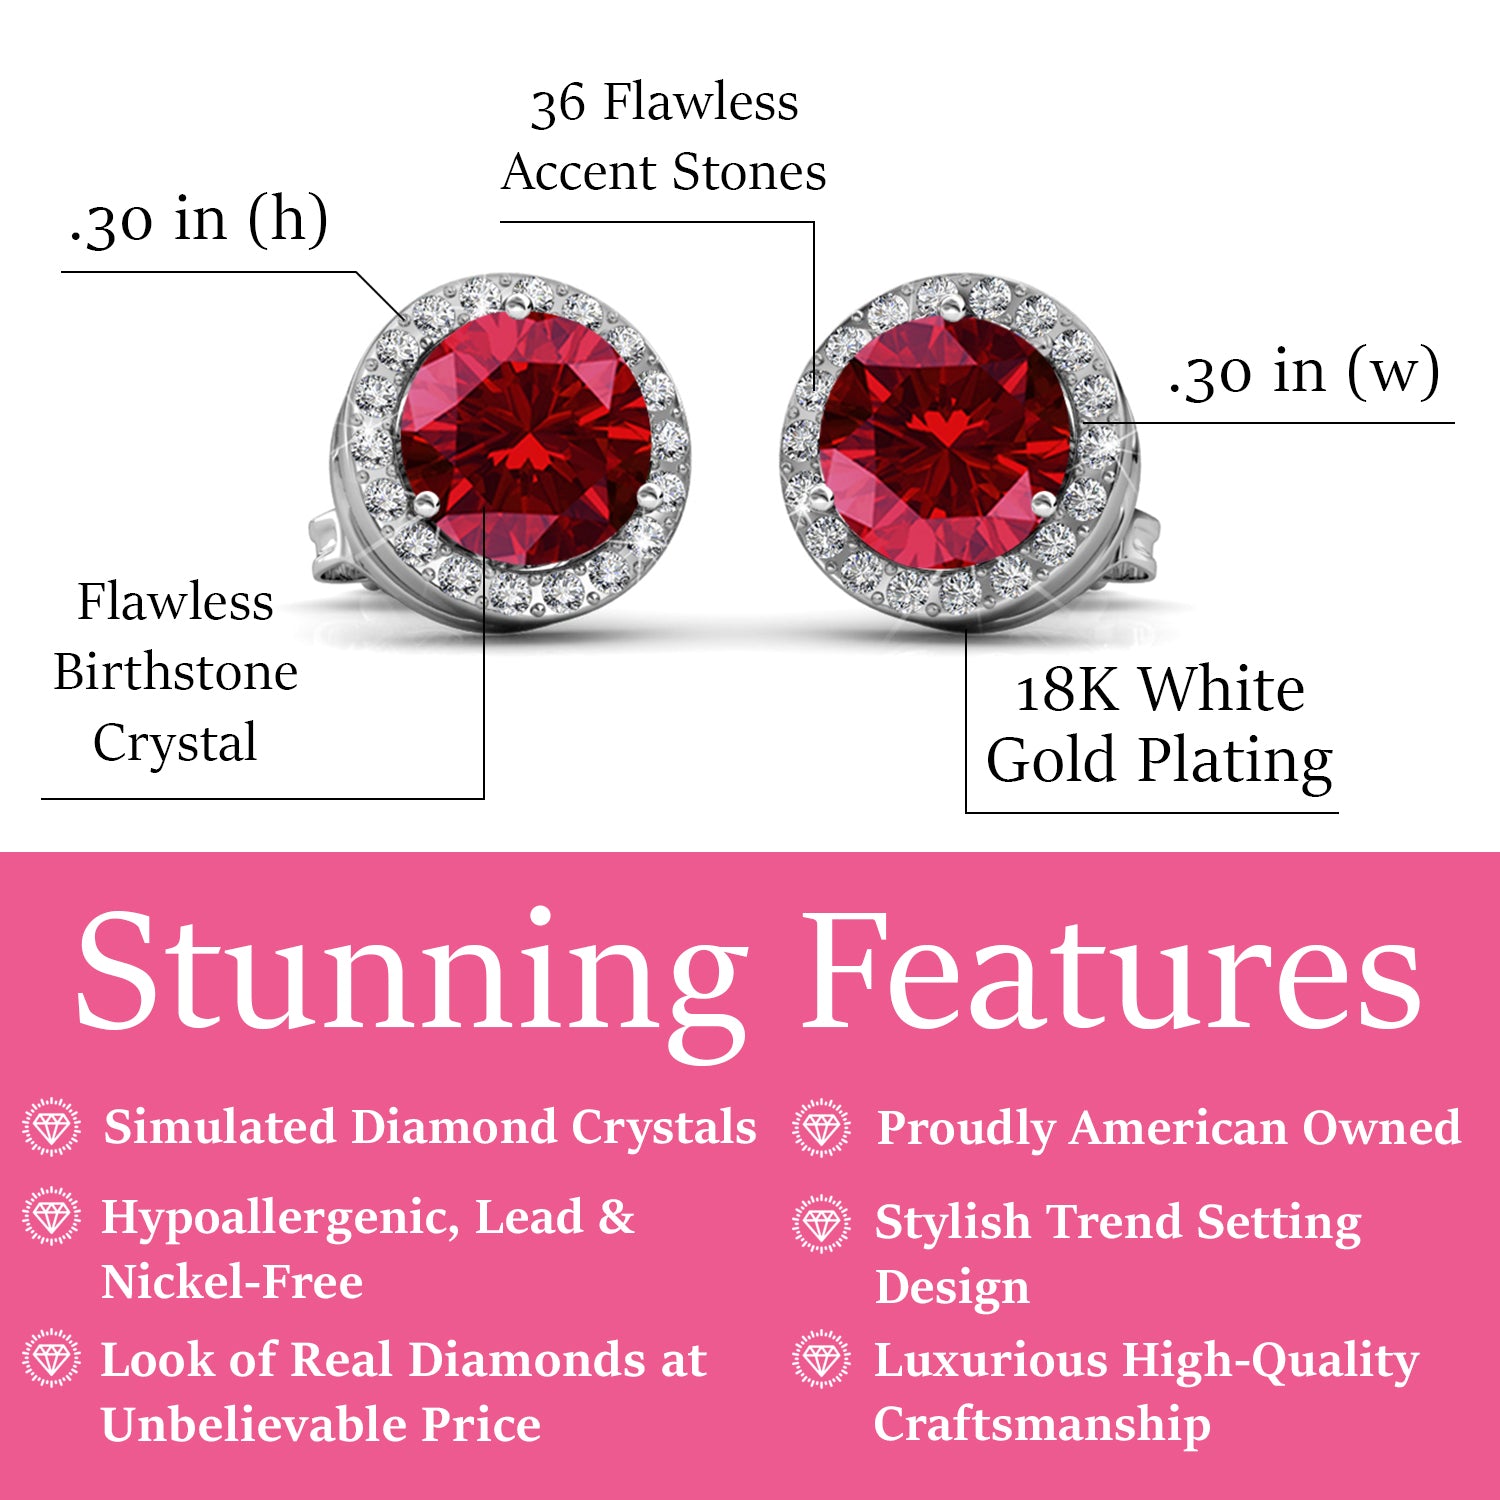 Royal January Birthstone Garnet Earrings, 18k White Gold Plated Silver Halo Earrings with Round Cut Crystals